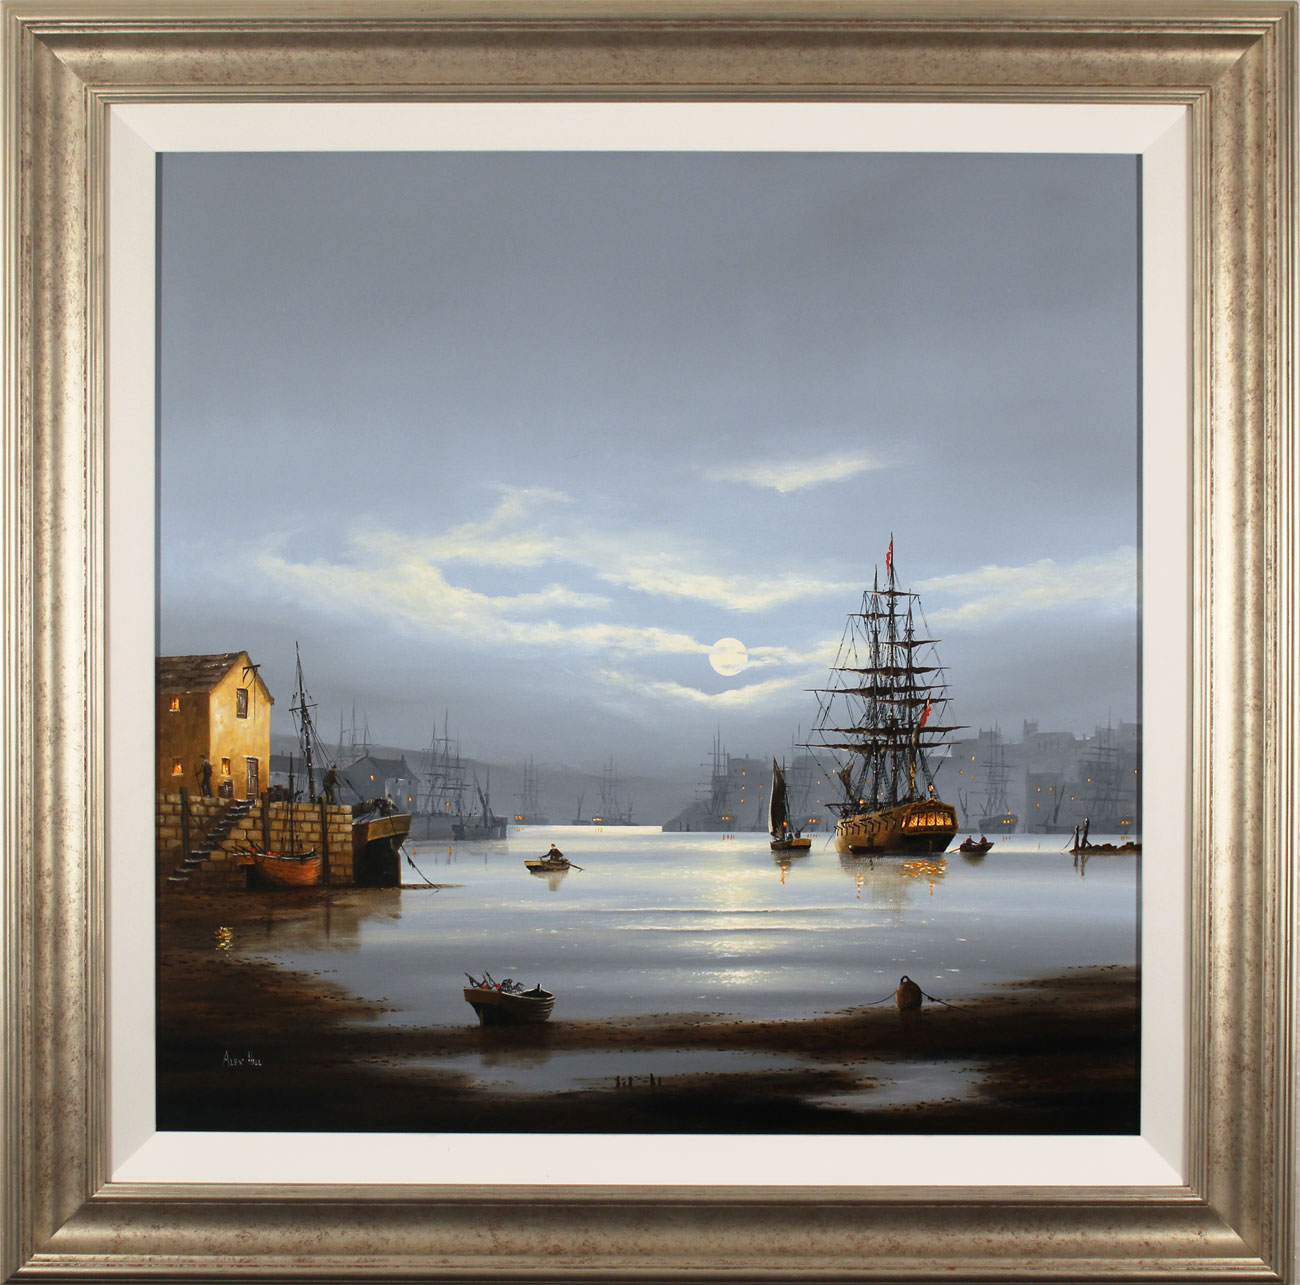 Alex Hill, Original oil painting on canvas, Moonlight Smugglers